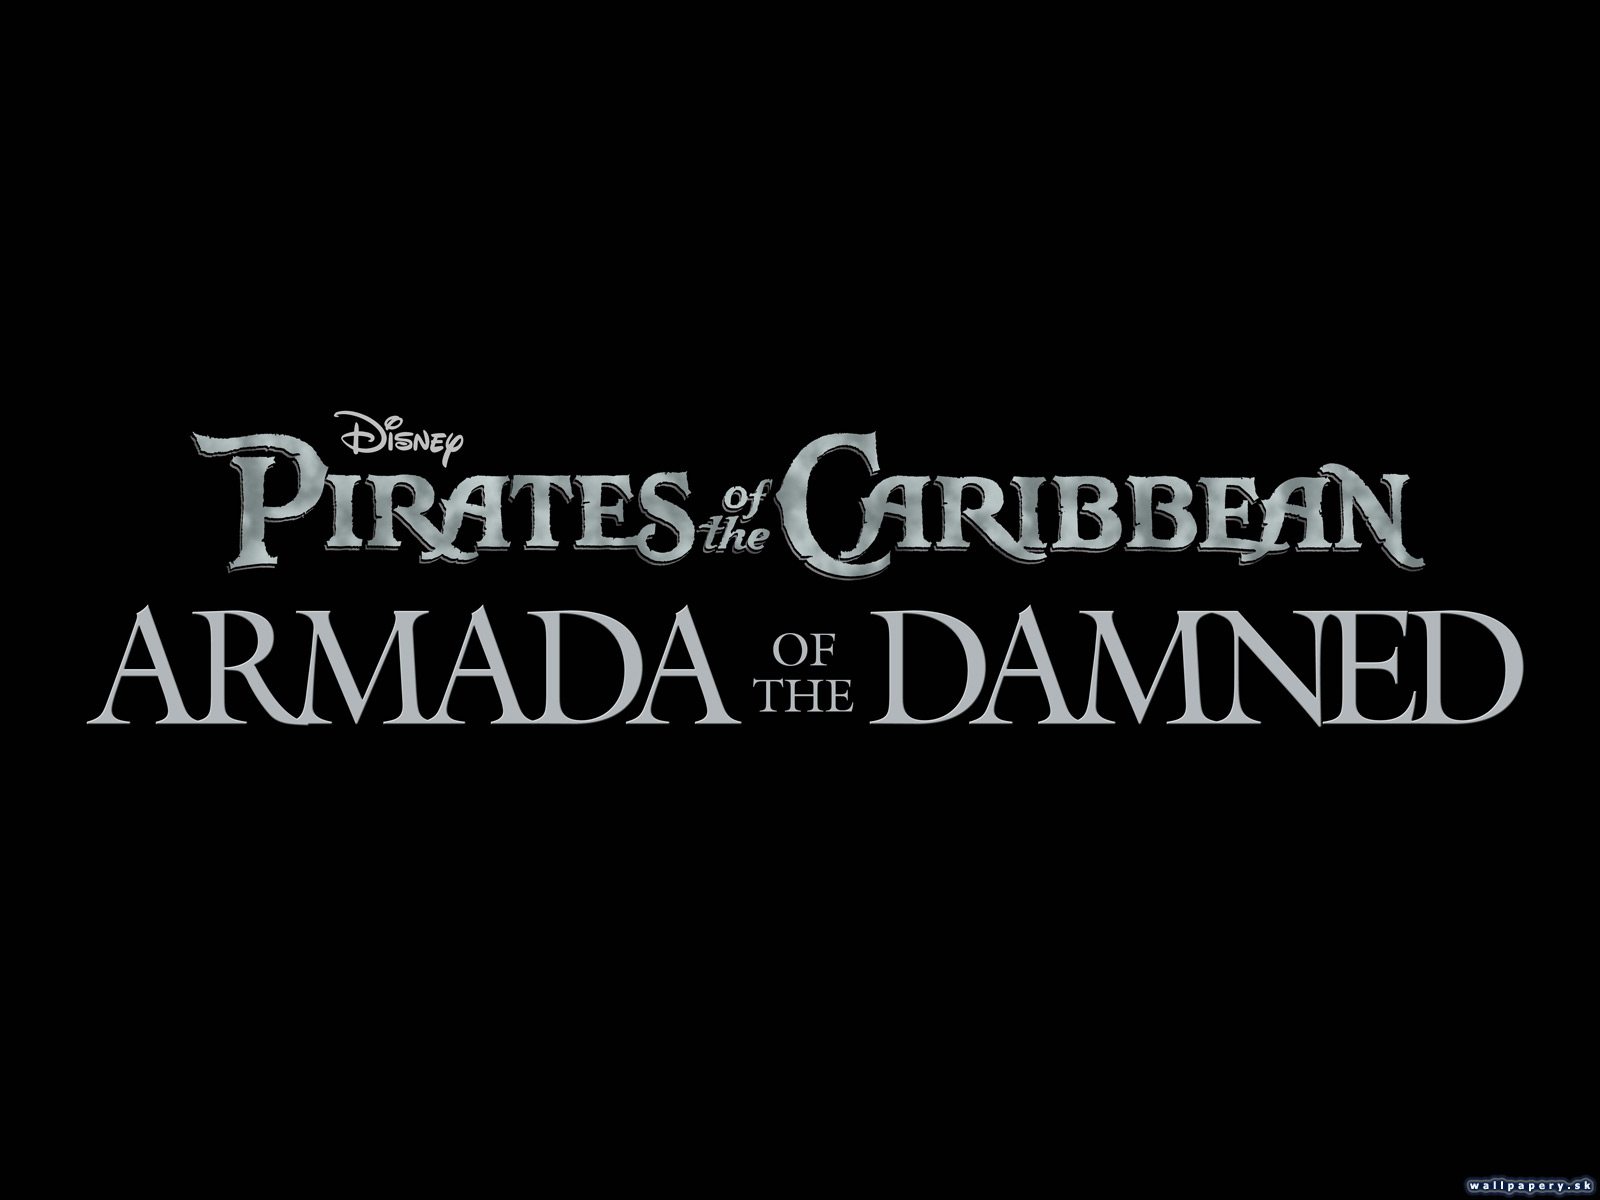 Pirates of the Caribbean: Armada of the Damned - wallpaper 4